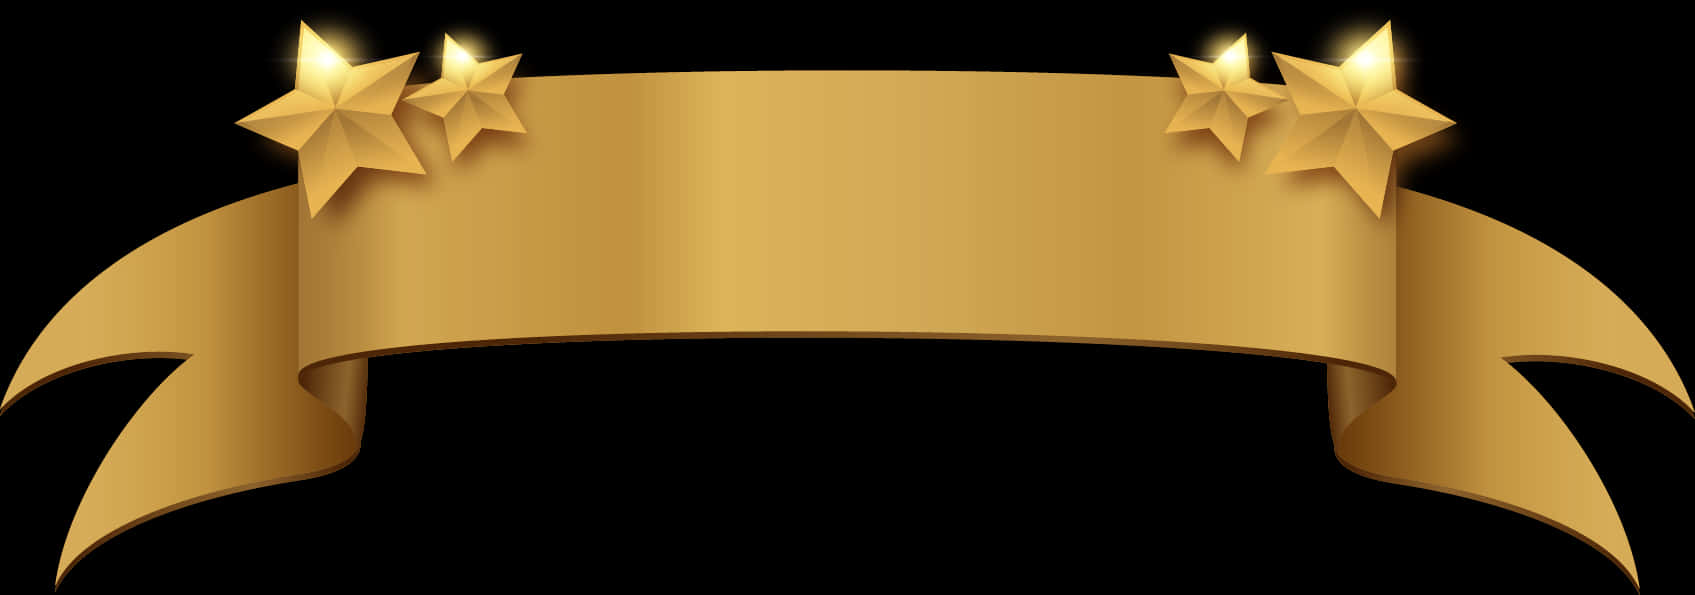 Golden Bannerwith Stars PNG